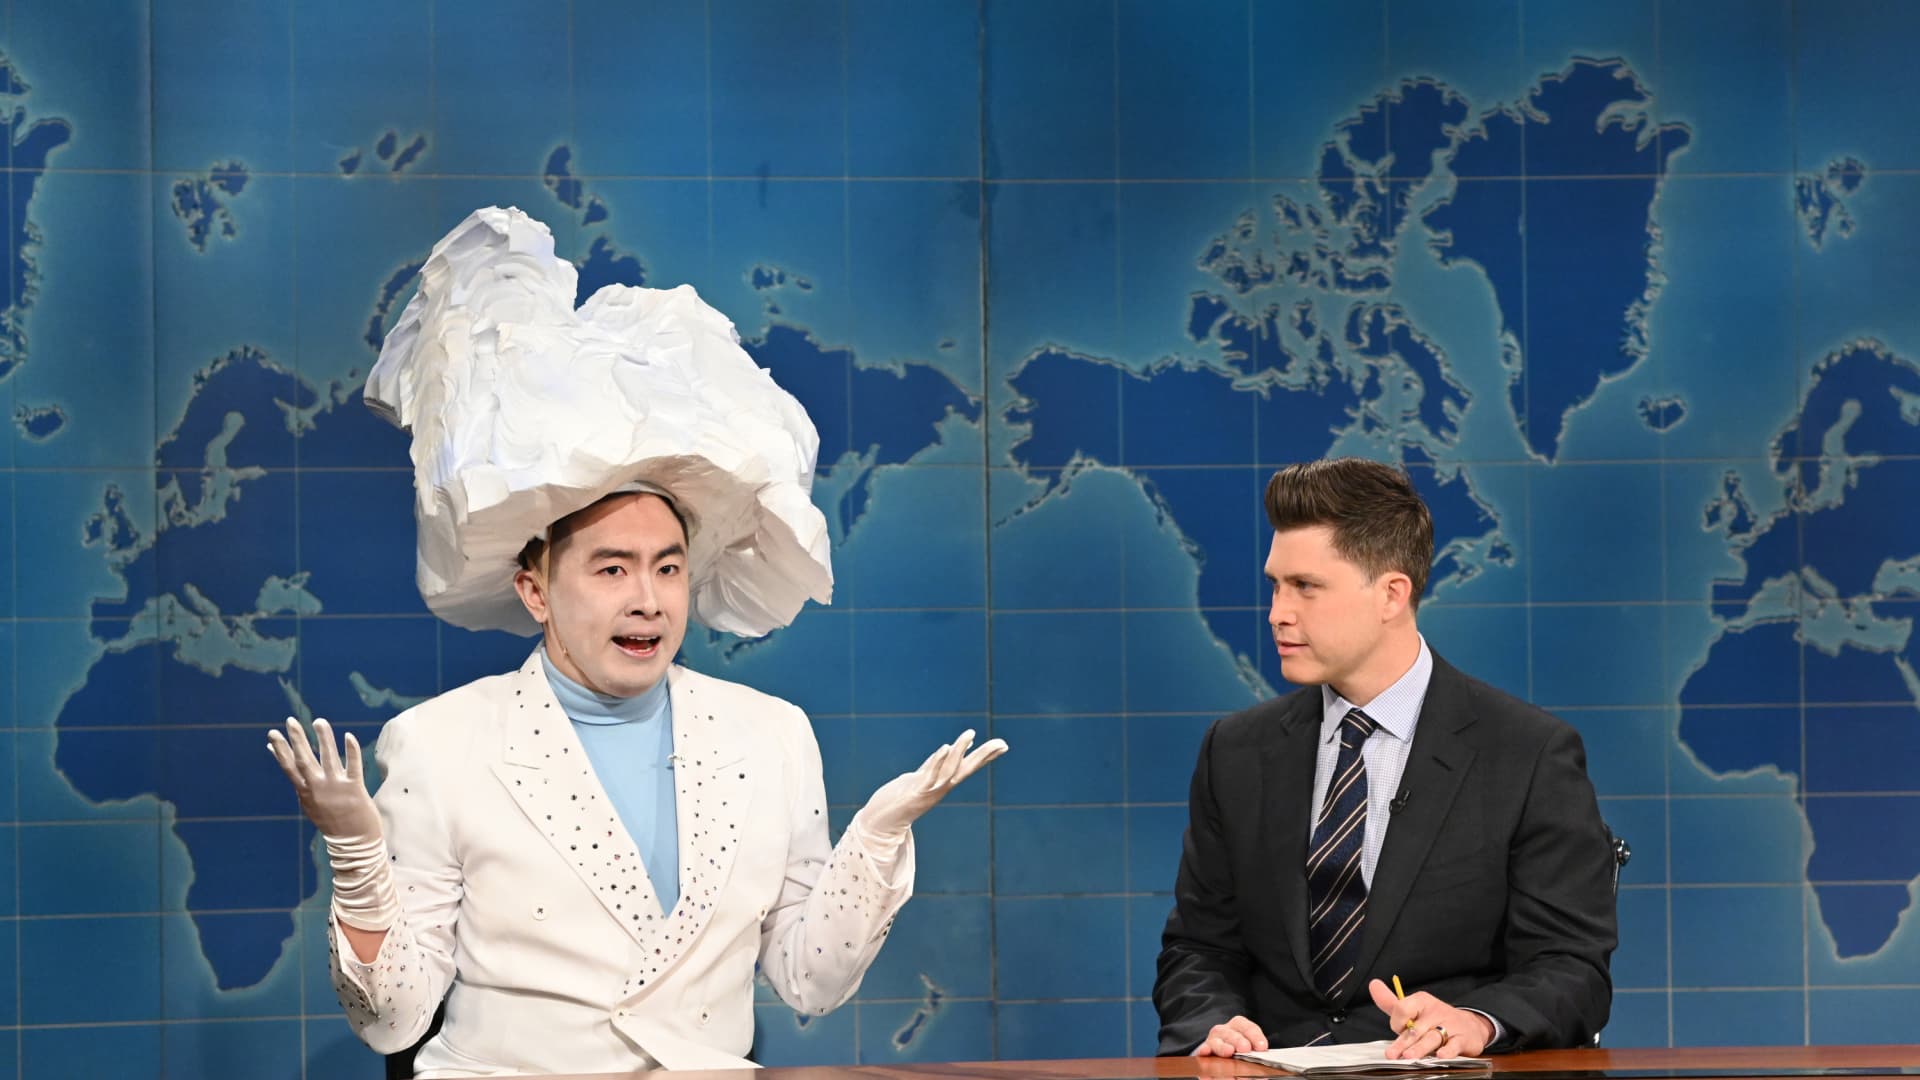 Pictured: (l-r) Bowen Yang as 'The Iceberg That Sank The Titanic' and anchor Colin Jost during Weekend Update on Saturday, April 10, 2021.